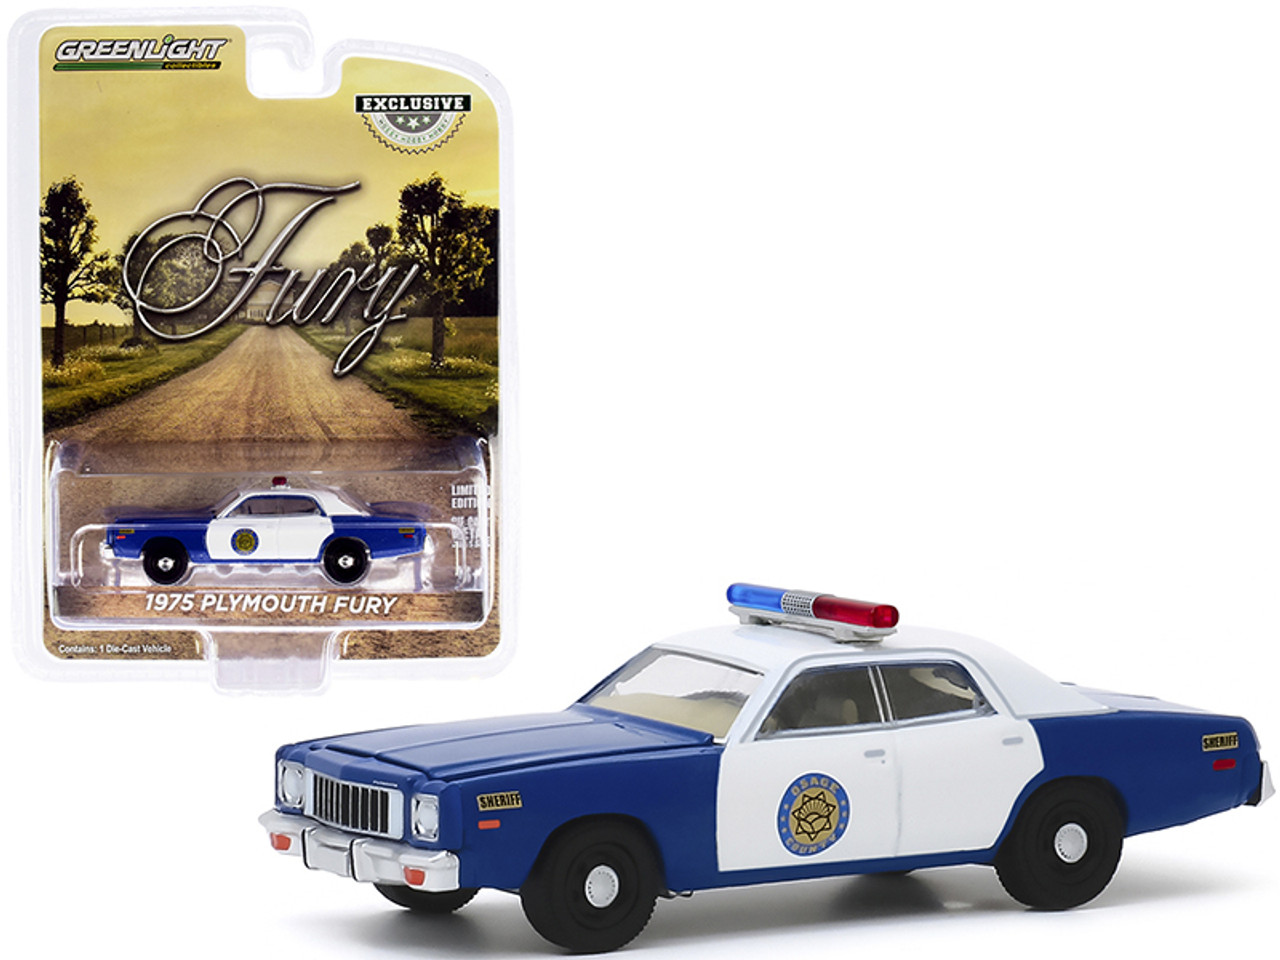 1975 Plymouth Fury Blue and White "Osage County Sheriff" "Hobby Exclusive" 1/64 Diecast Model Car by Greenlight